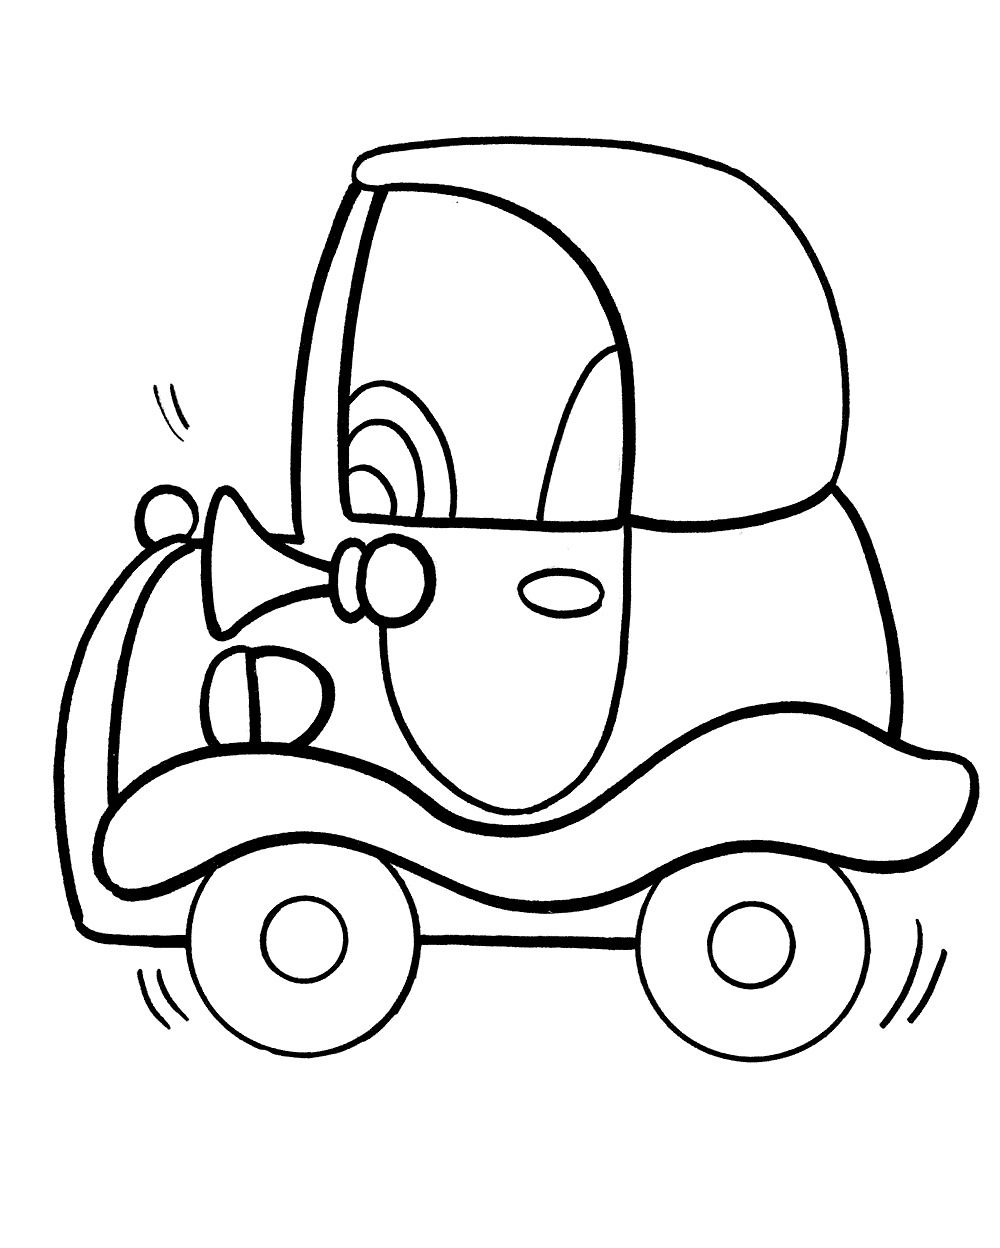 Coloring page - Toy car